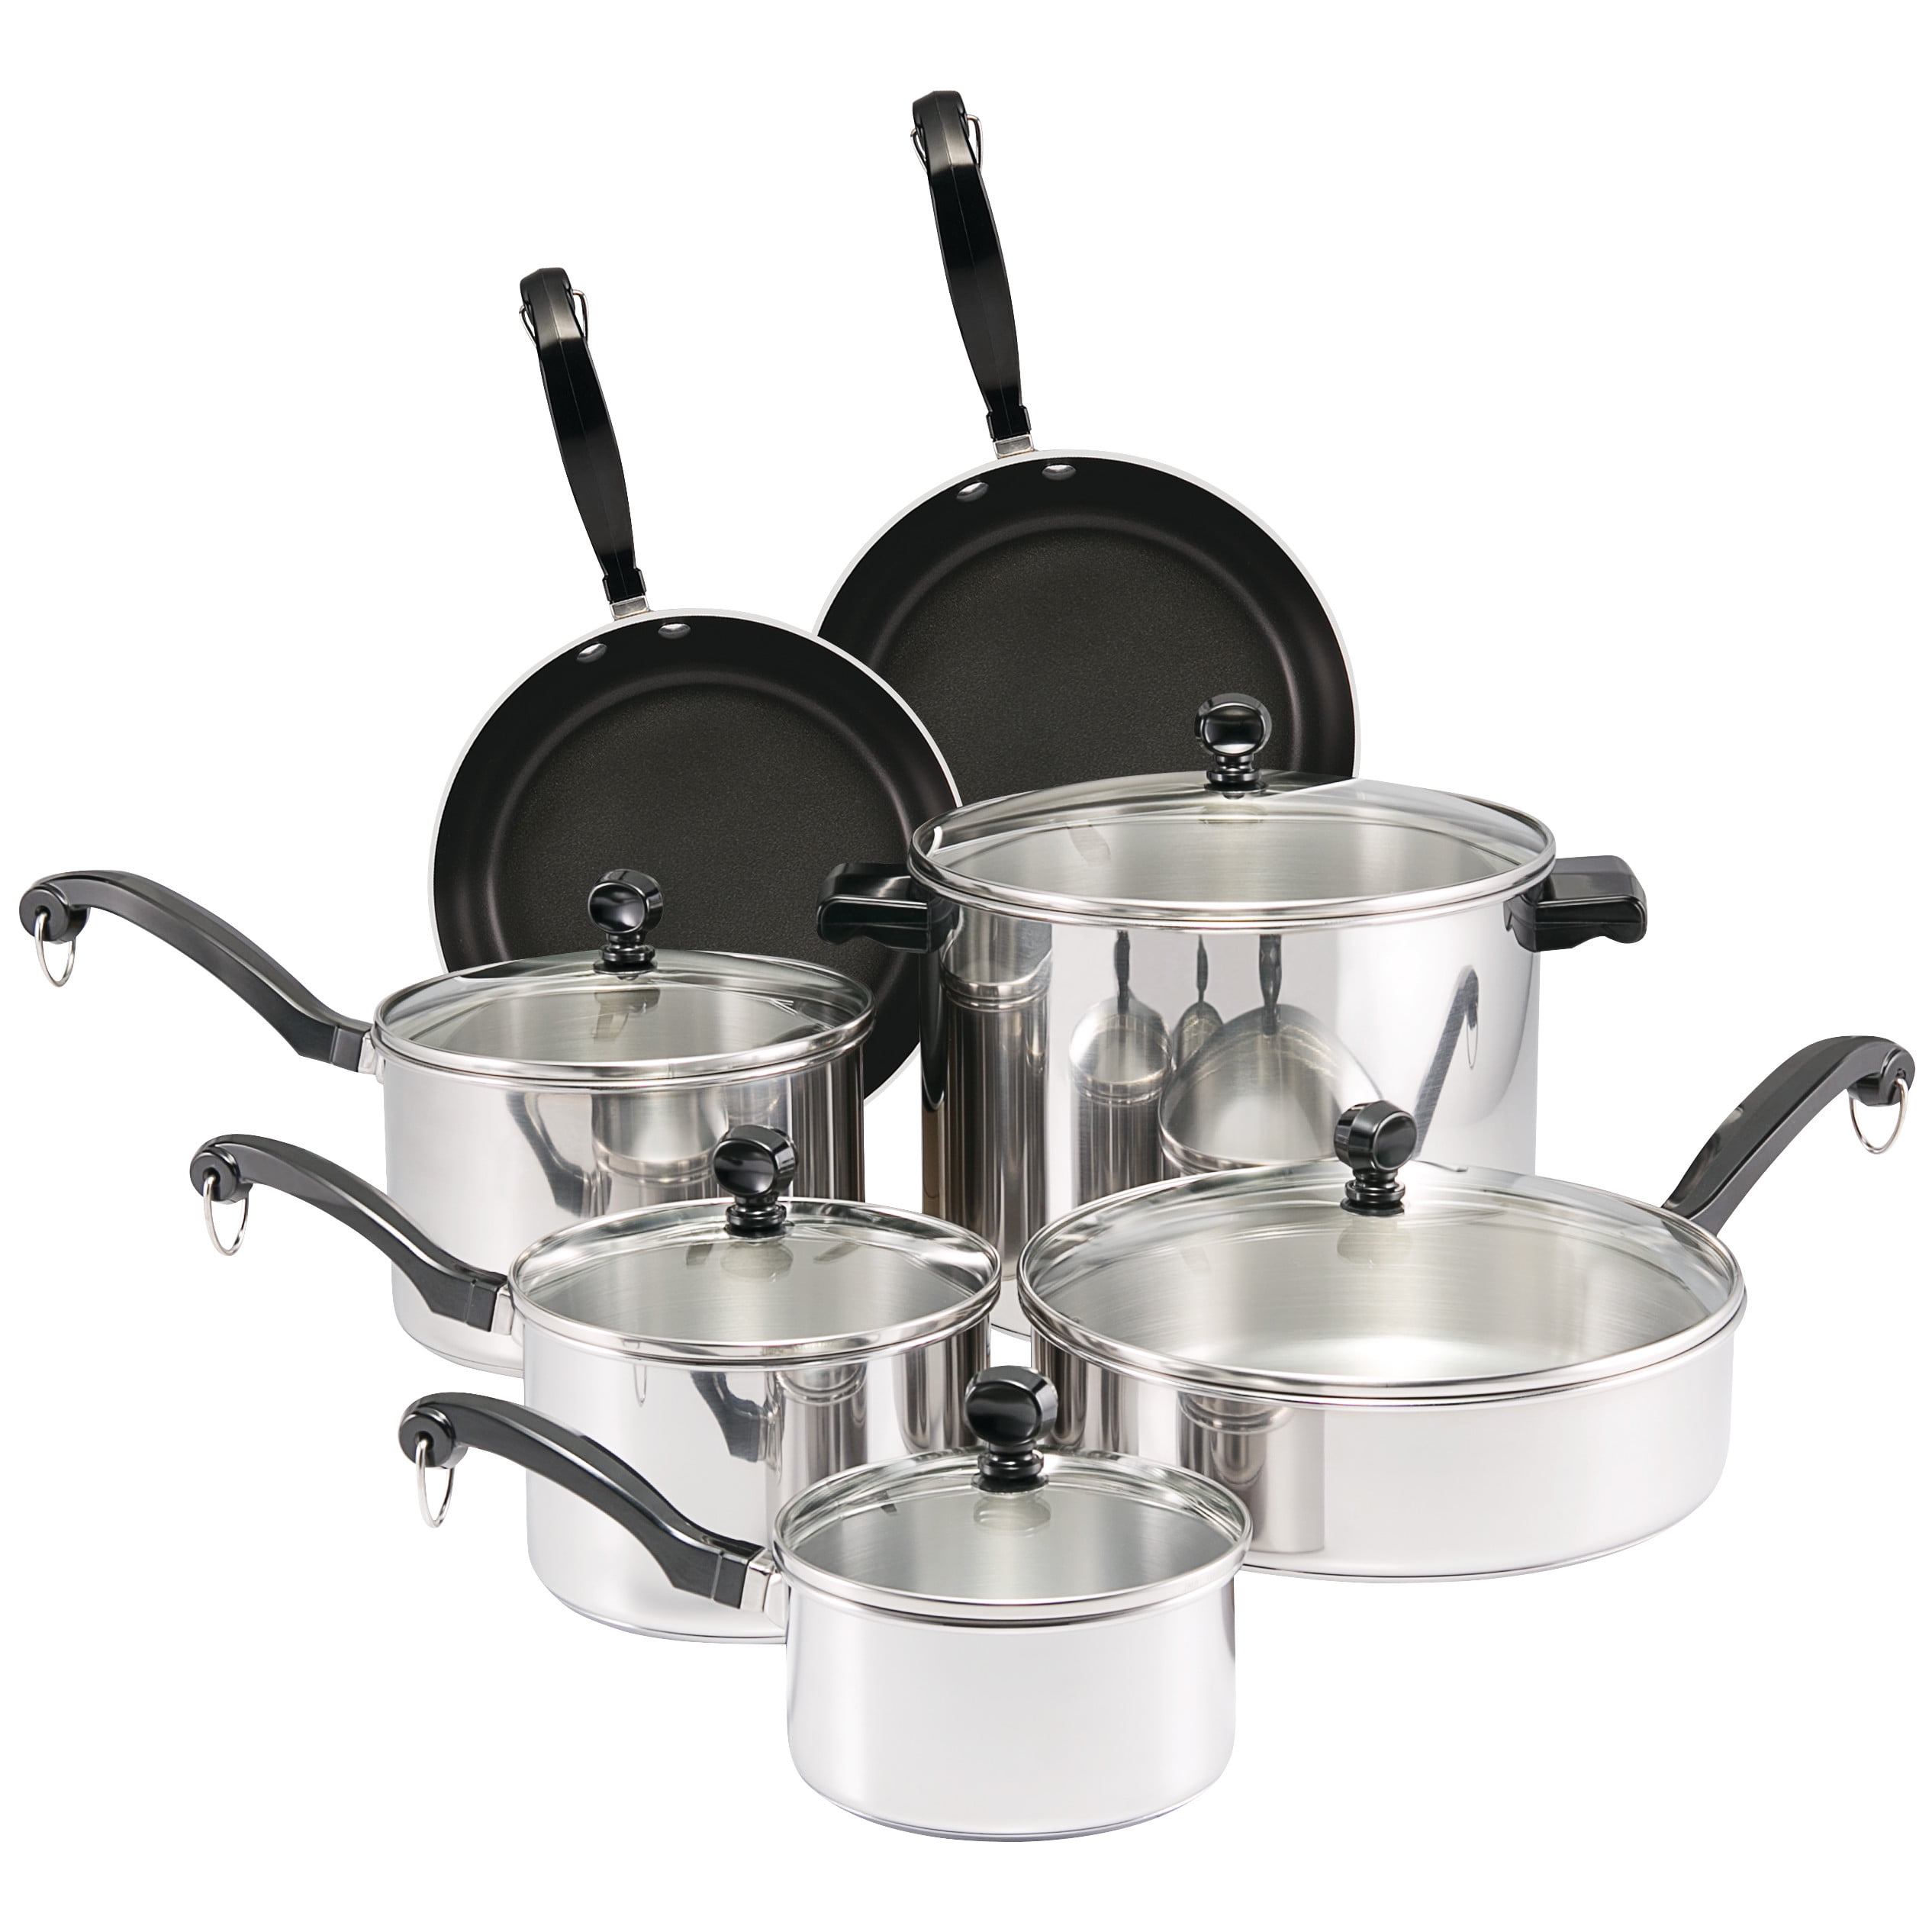  Farberware Classic Stainless Steel Cookware Pots and Pans Set,  15-Piece,50049,Silver & Classic Stainless Series 2-Quart Covered Double  Boiler: Home & Kitchen